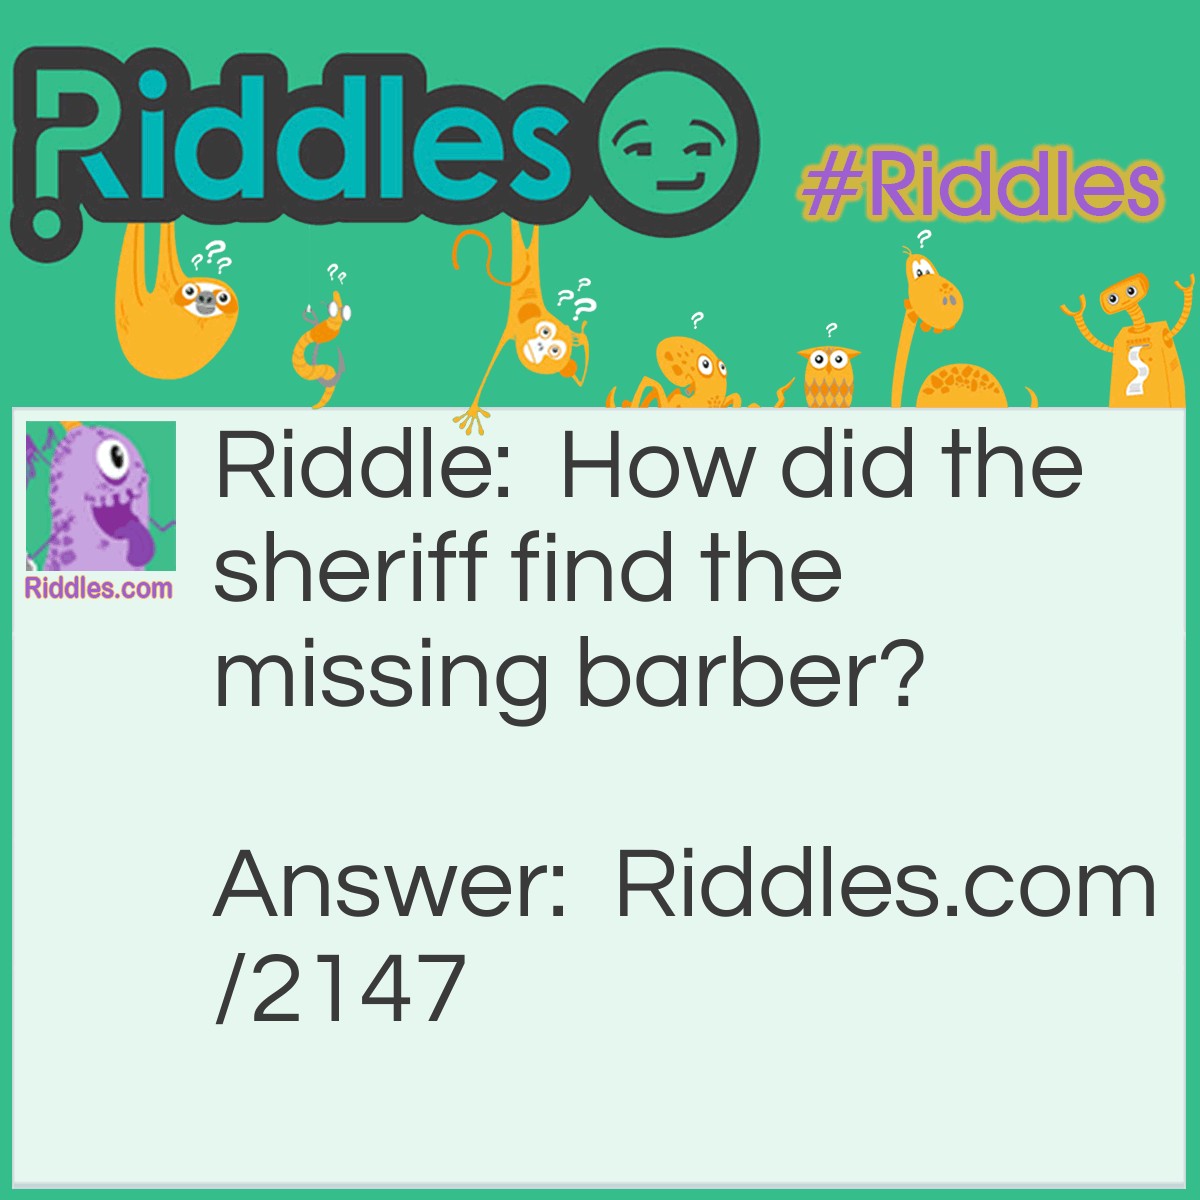 Riddle: How did the sheriff find the missing barber? Answer: He combed the town.